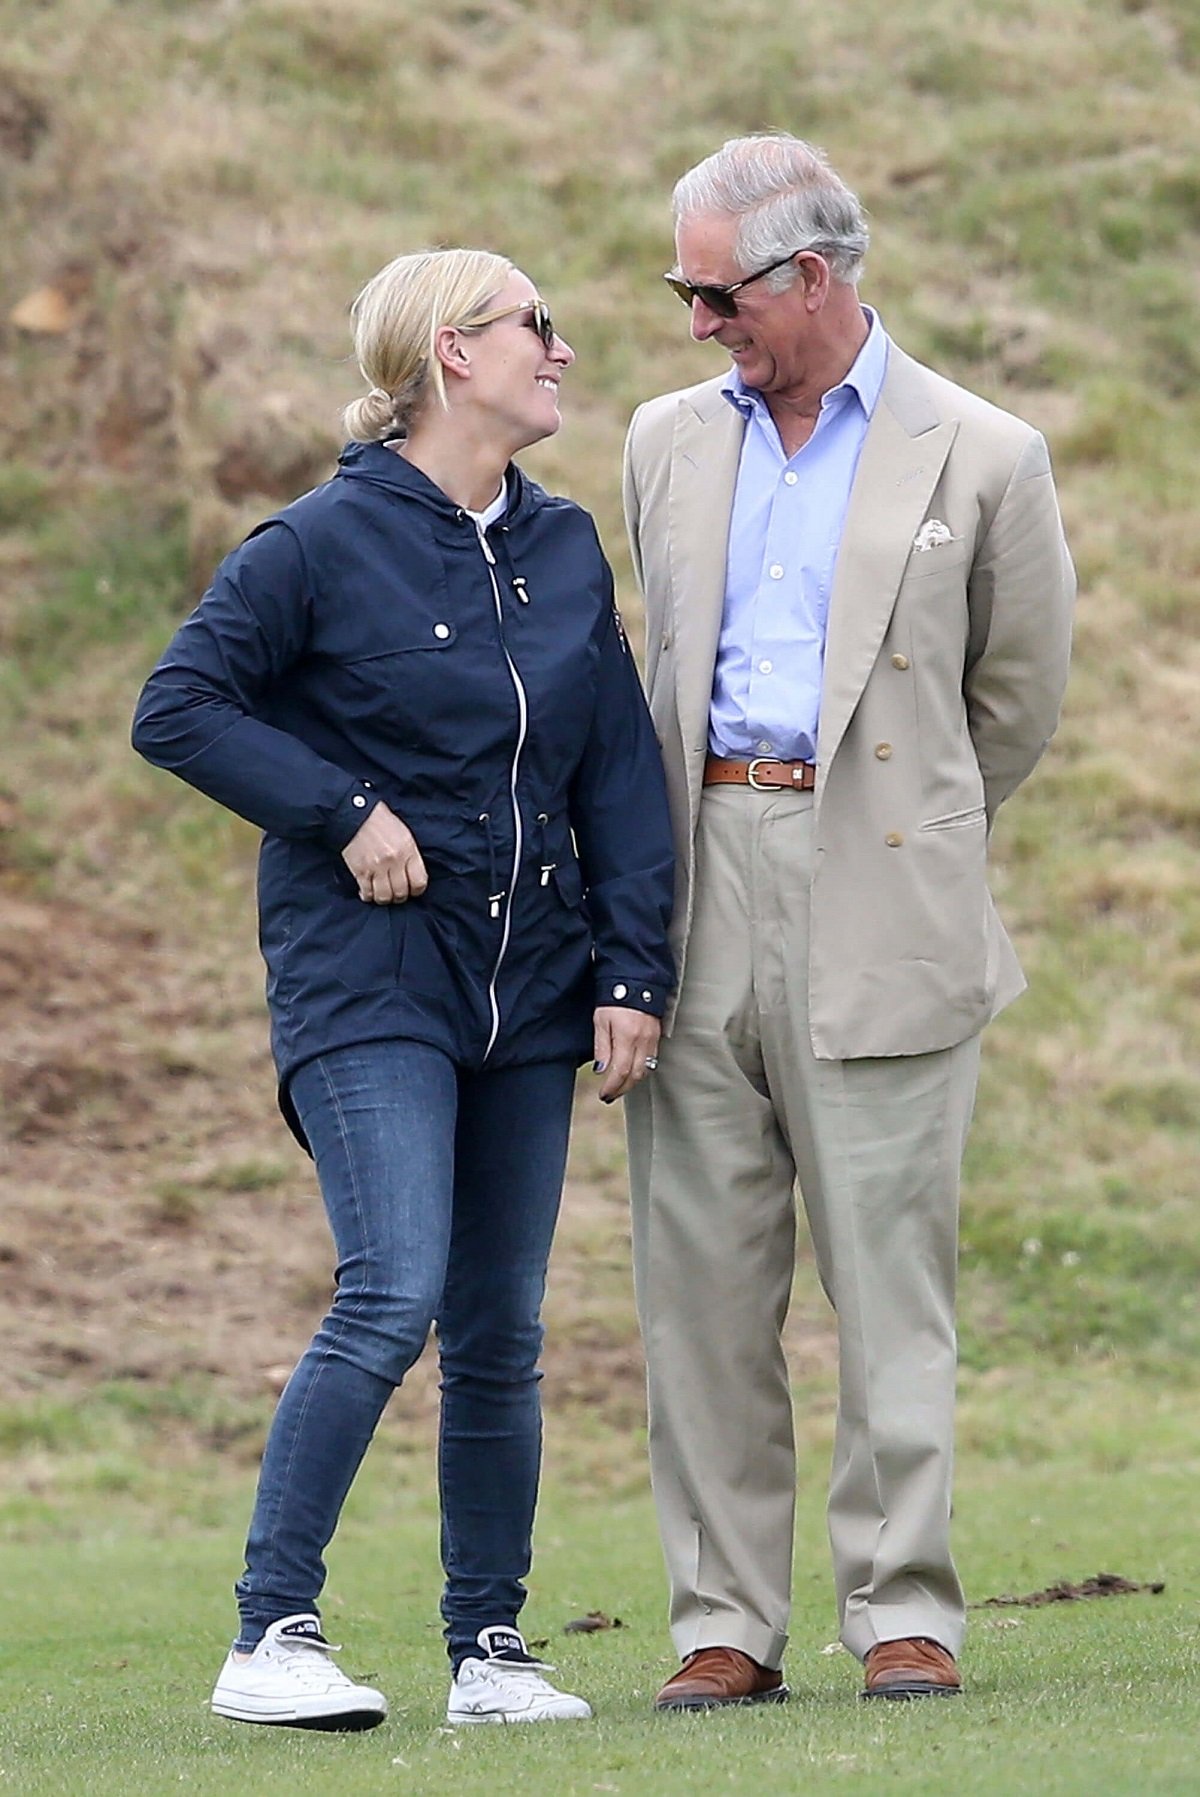 Zara Tindall and now-King Charles sharing a laugh at the Gigaset Charity Polo Match